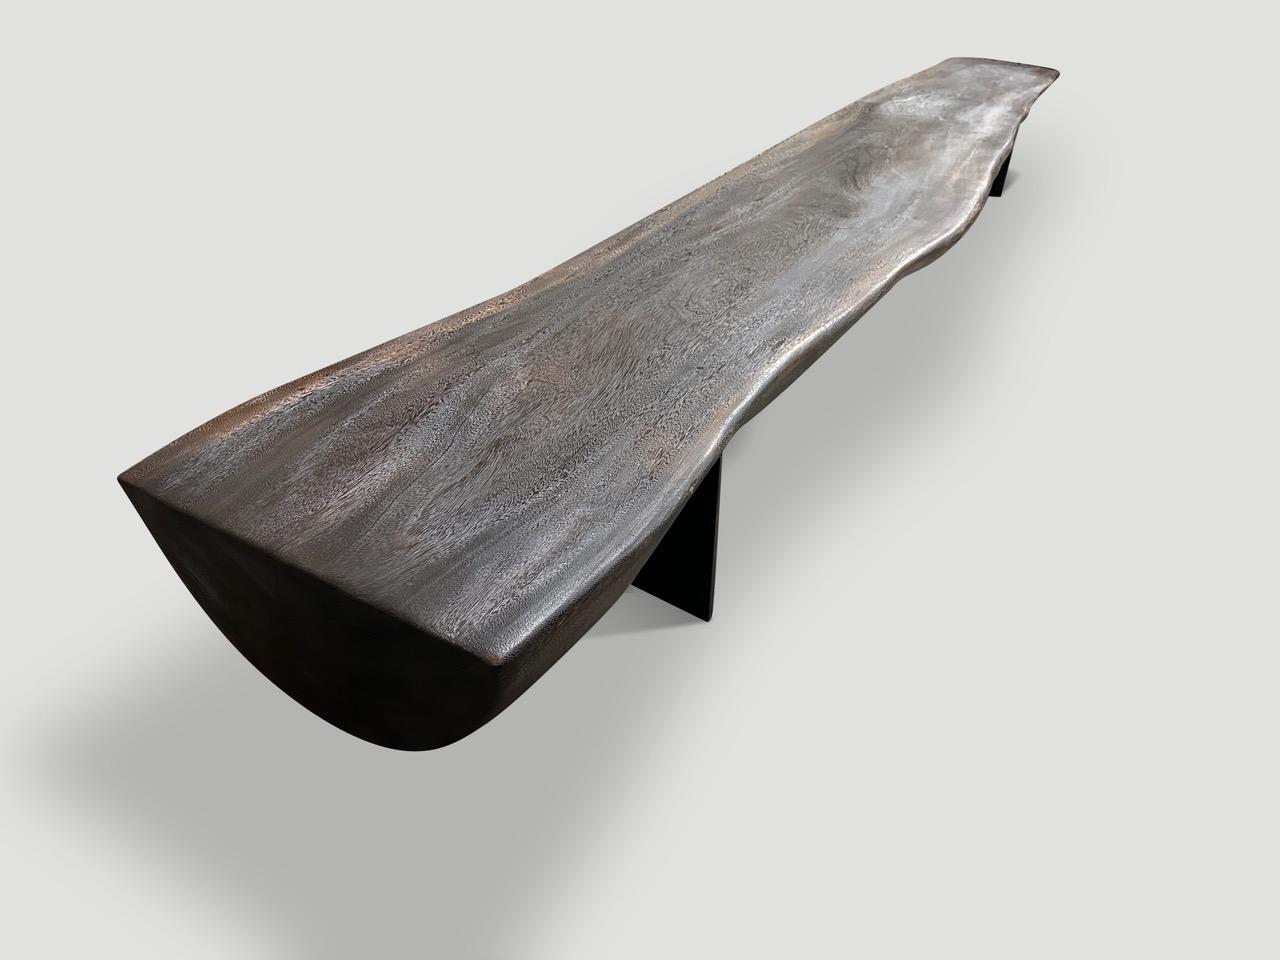 A beautiful suar wood reclaimed log has been cut in half to produce this dramatic long bench with a live edge from 22” to 14” wide. We added sleek minimalist steel legs in contrast to this ten inch thick log. Lightly charred revealing the unique